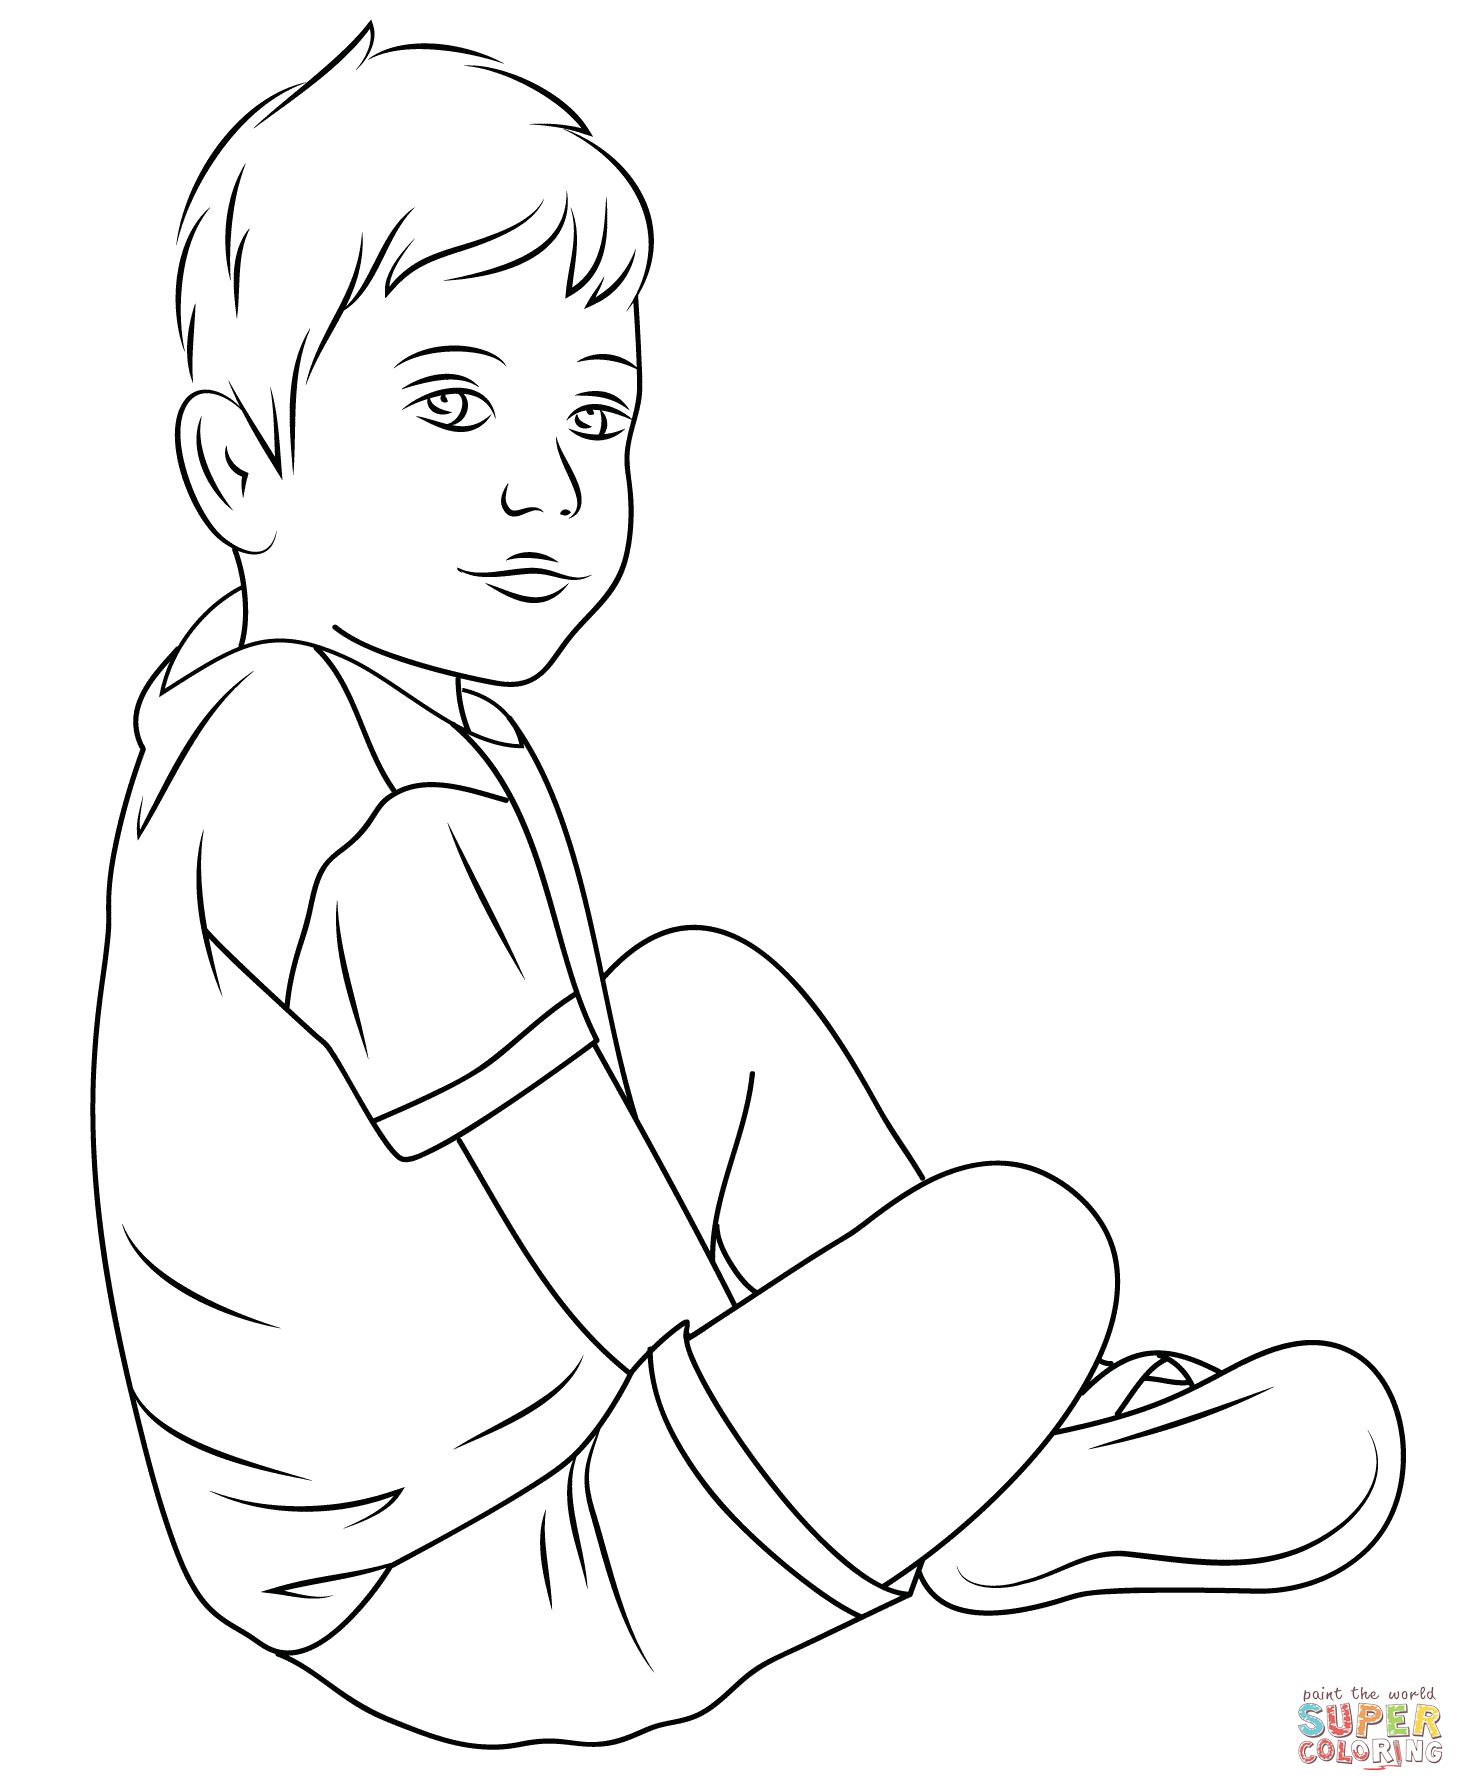 Child coloring page | Free Printable Coloring Pages